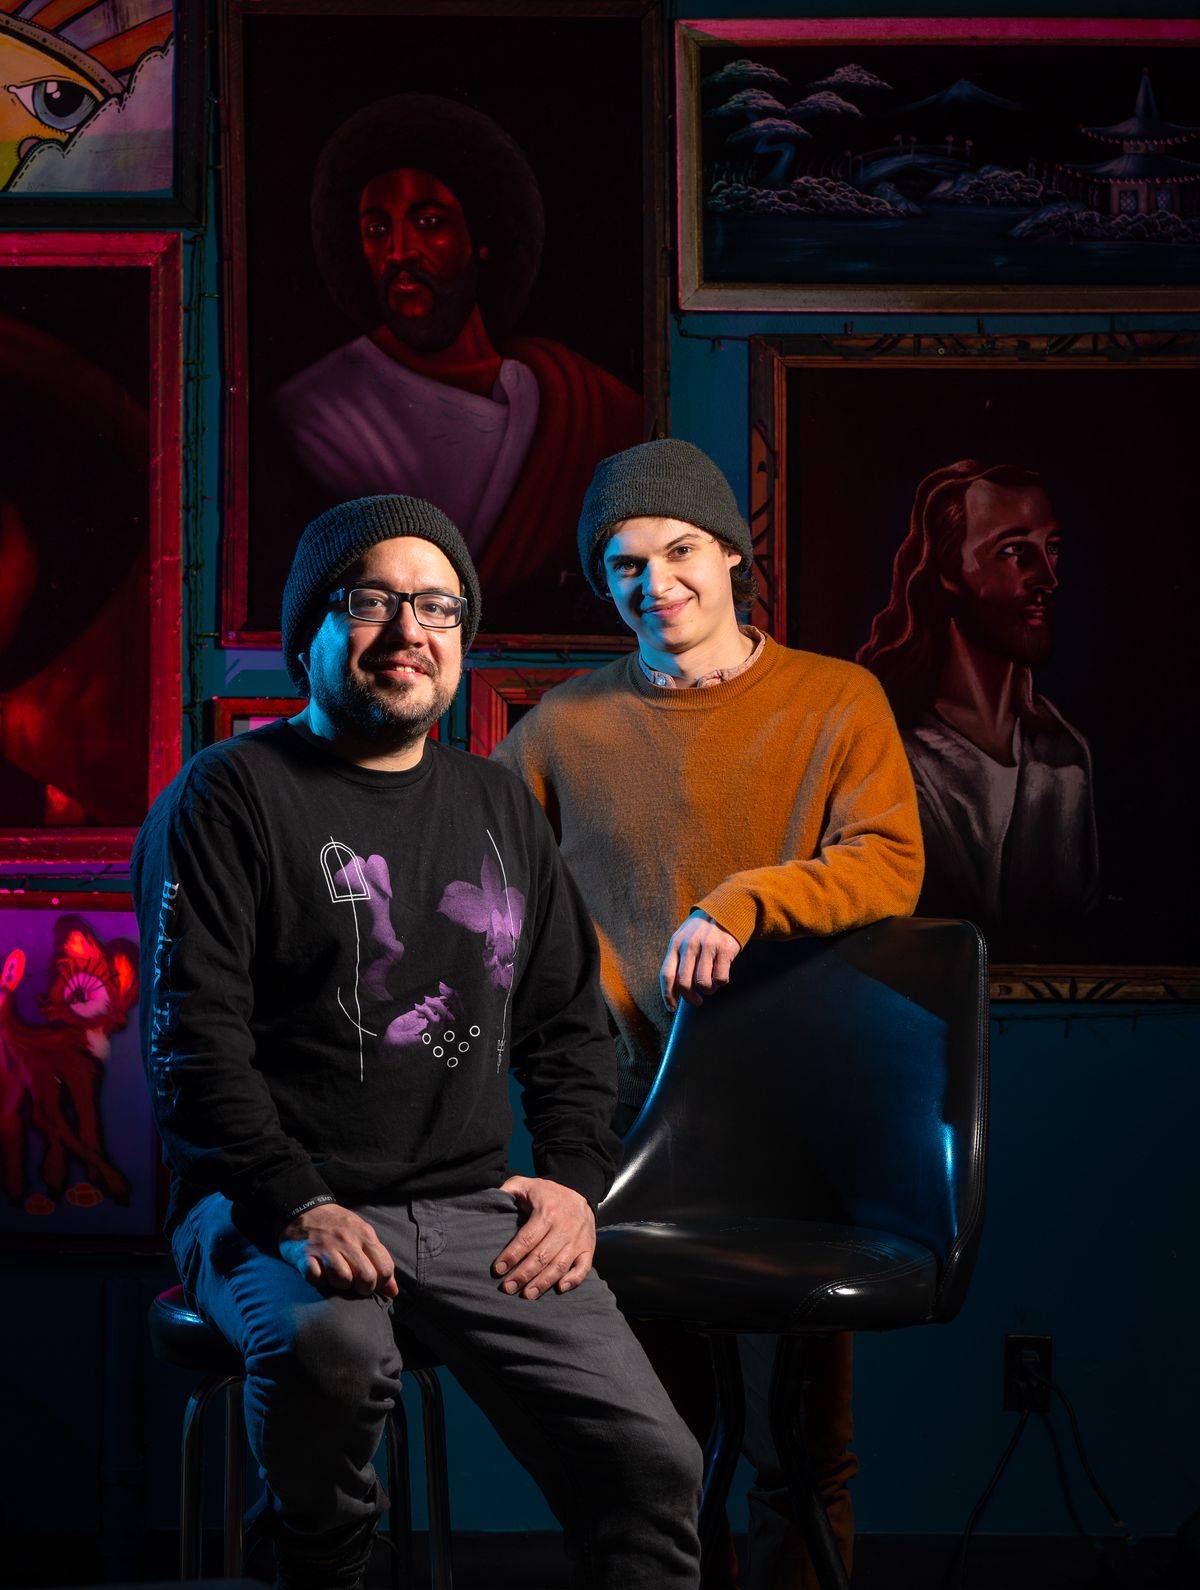 Luis Mota owns the Palimpsest Group, a local music publicity and management company, and Norman Robbins is lead singer and guitarist of the Spokane indie rock band BaLonely. Mota and Robbins have recently formed a partnership for local music events.  (Colin Mulvany/The Spokesman-Review)